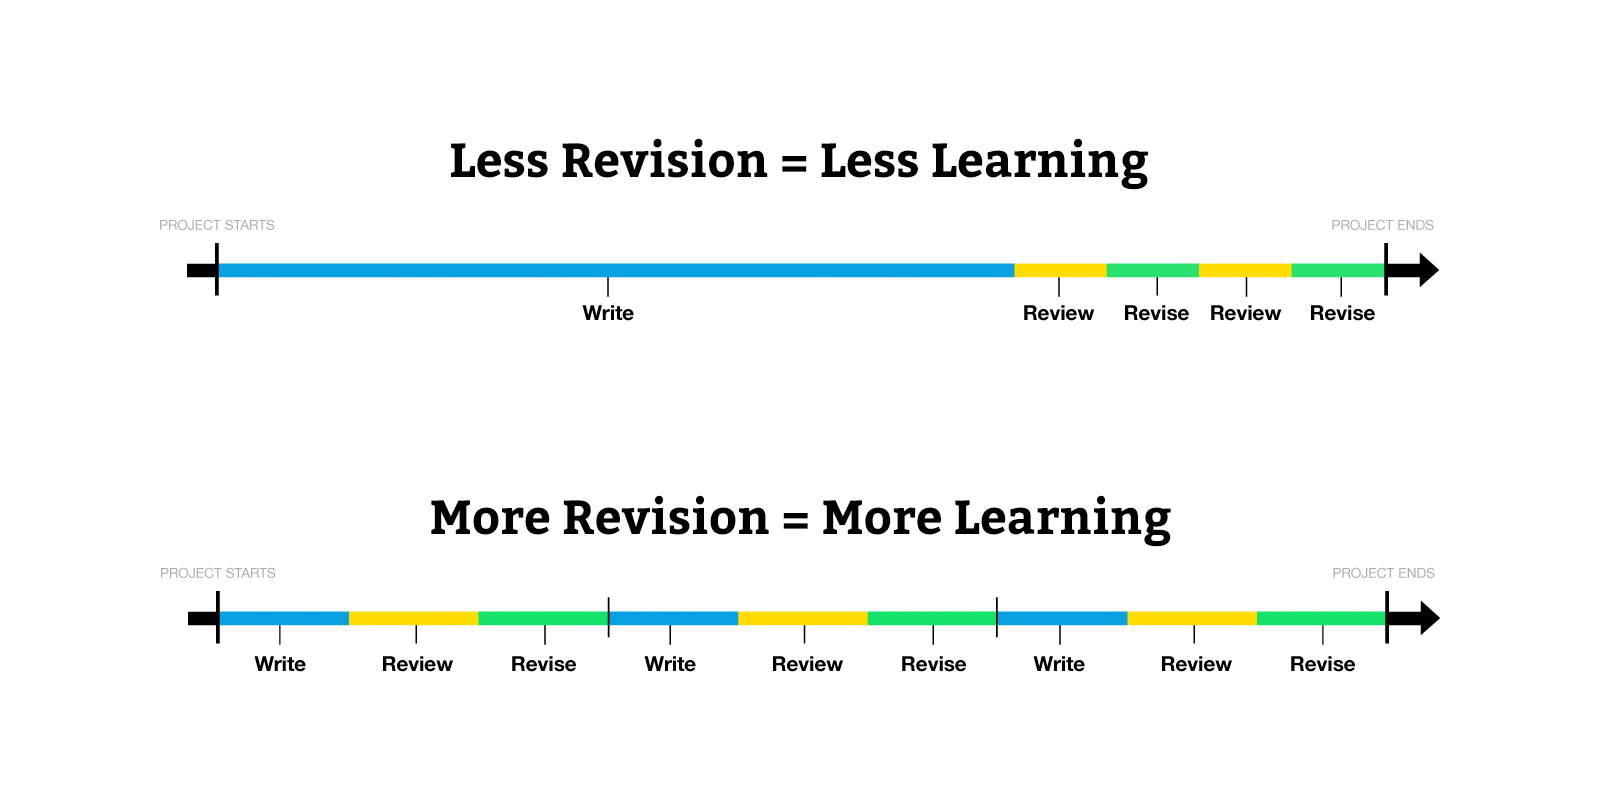 More Revision = More Learning